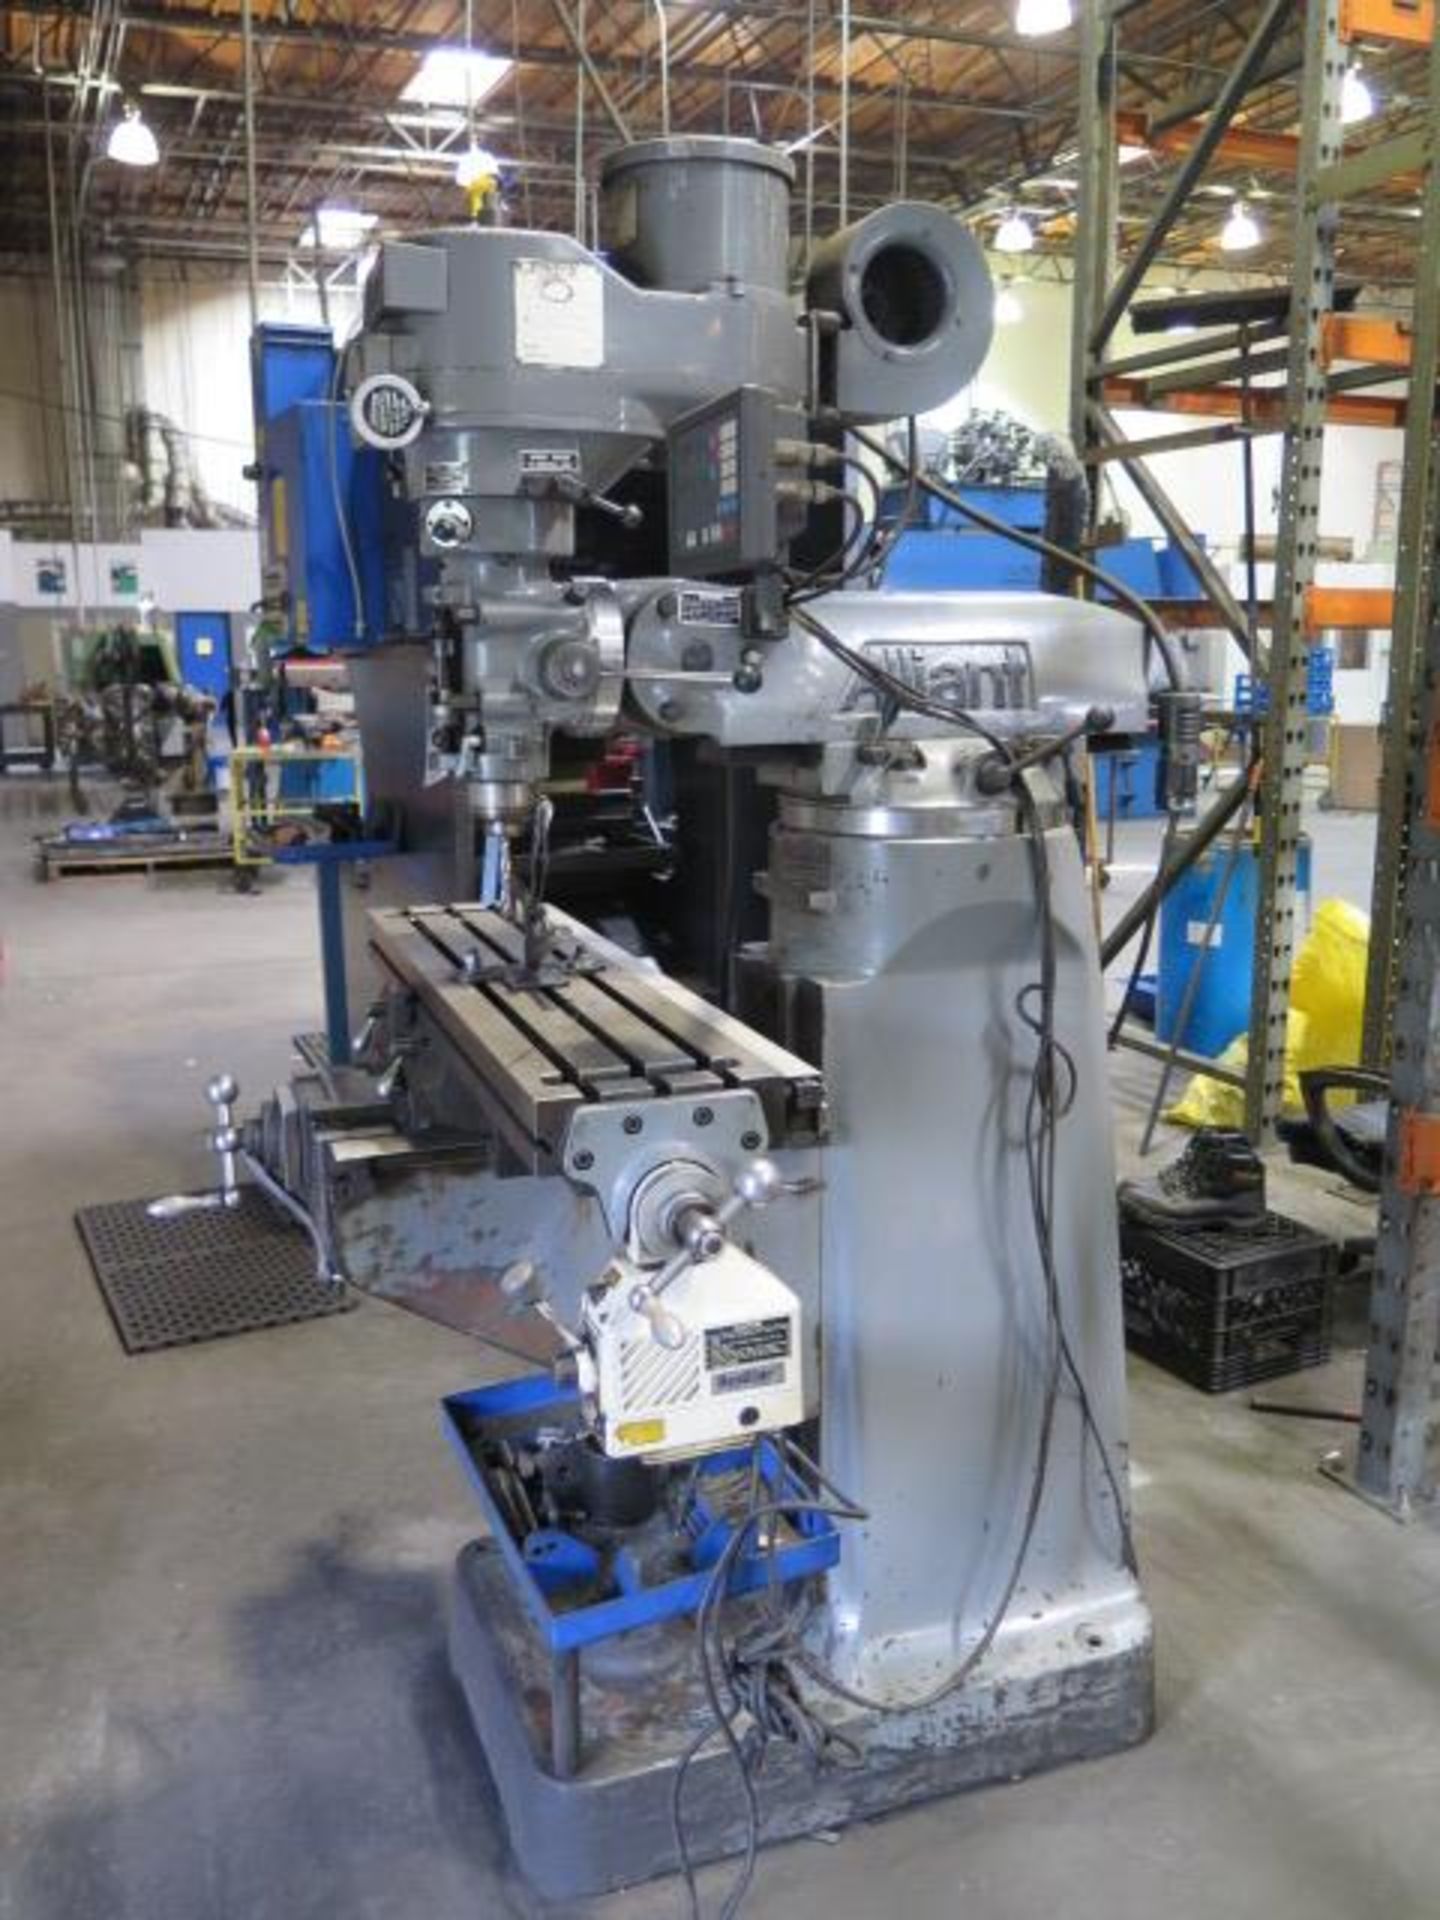 Alliant Vertical Mill s/n 61210241 w/ DRO, 2Hp Motor,60-4500 Dial Change RPM, Chrome ways,SOLD AS IS - Image 2 of 16